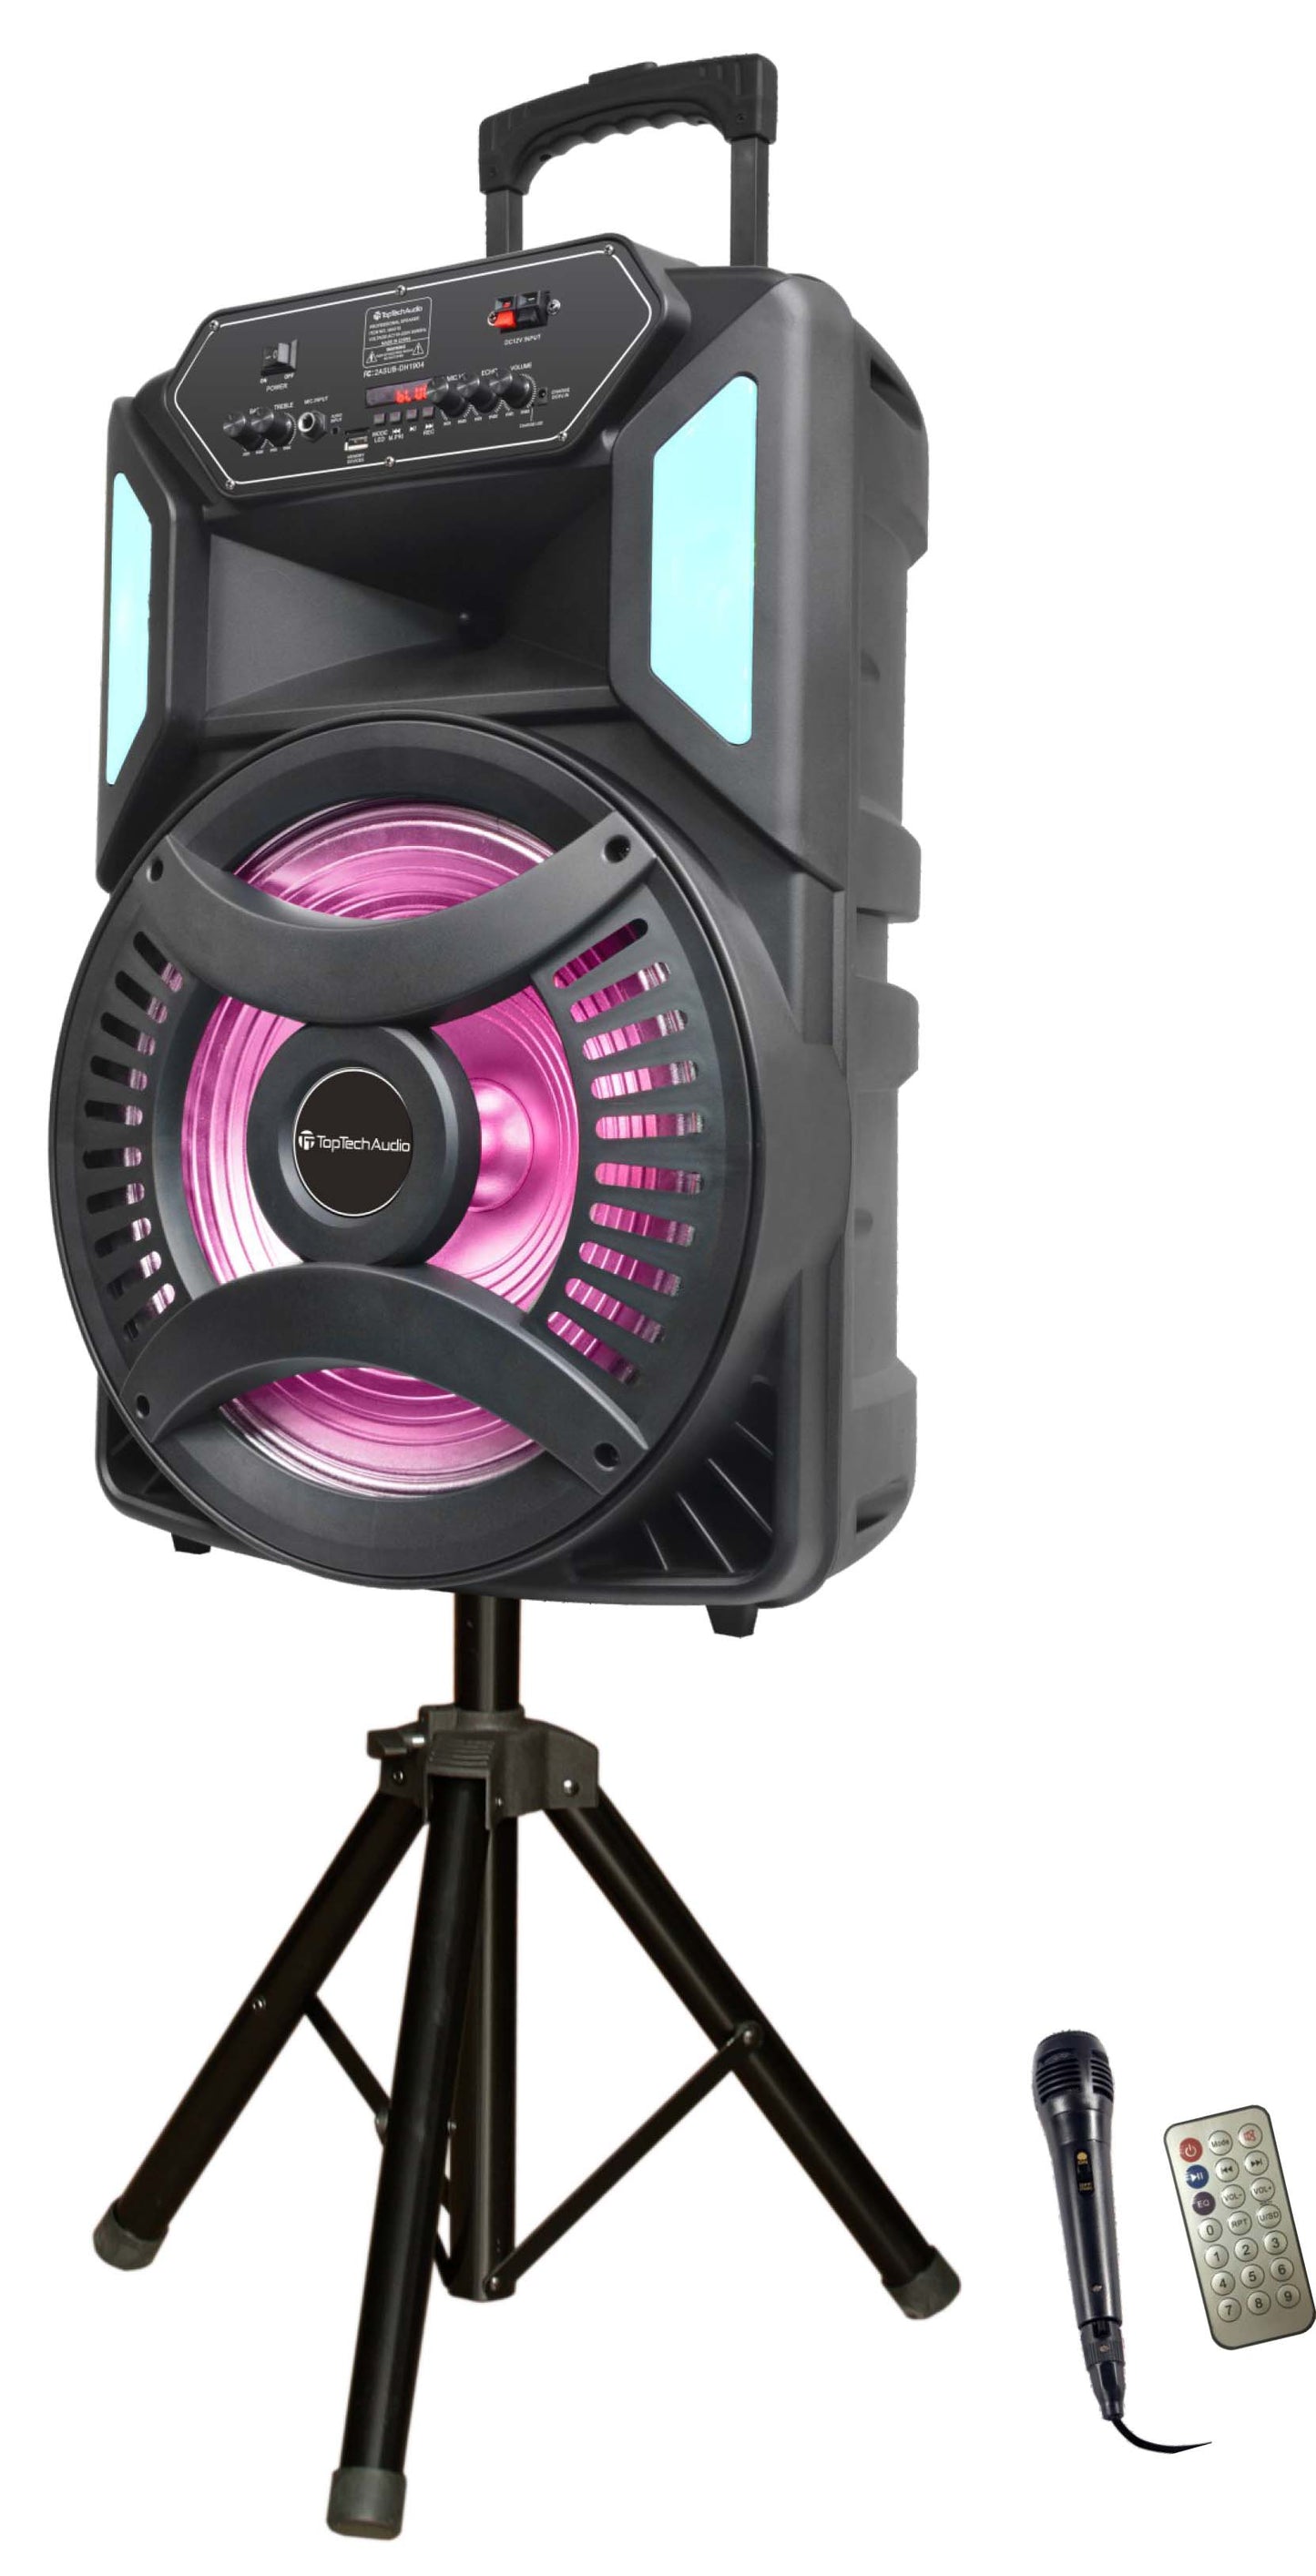 Fully Amplified Portable 6000 Watts Peak Power 15” Speaker with led light